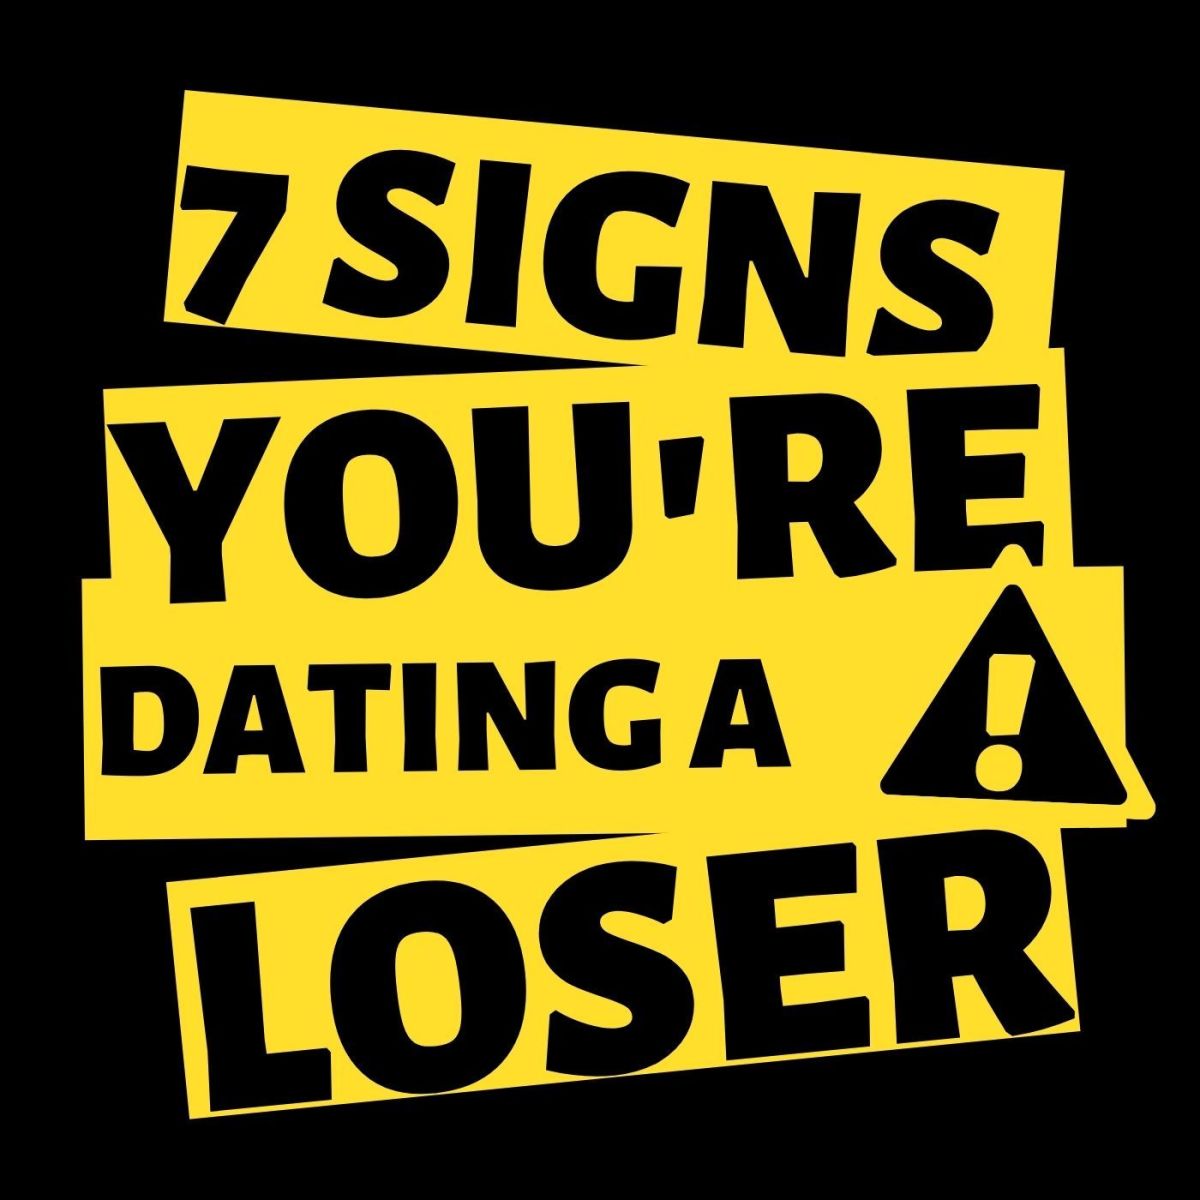 Are you dating a loser? Knock it off!